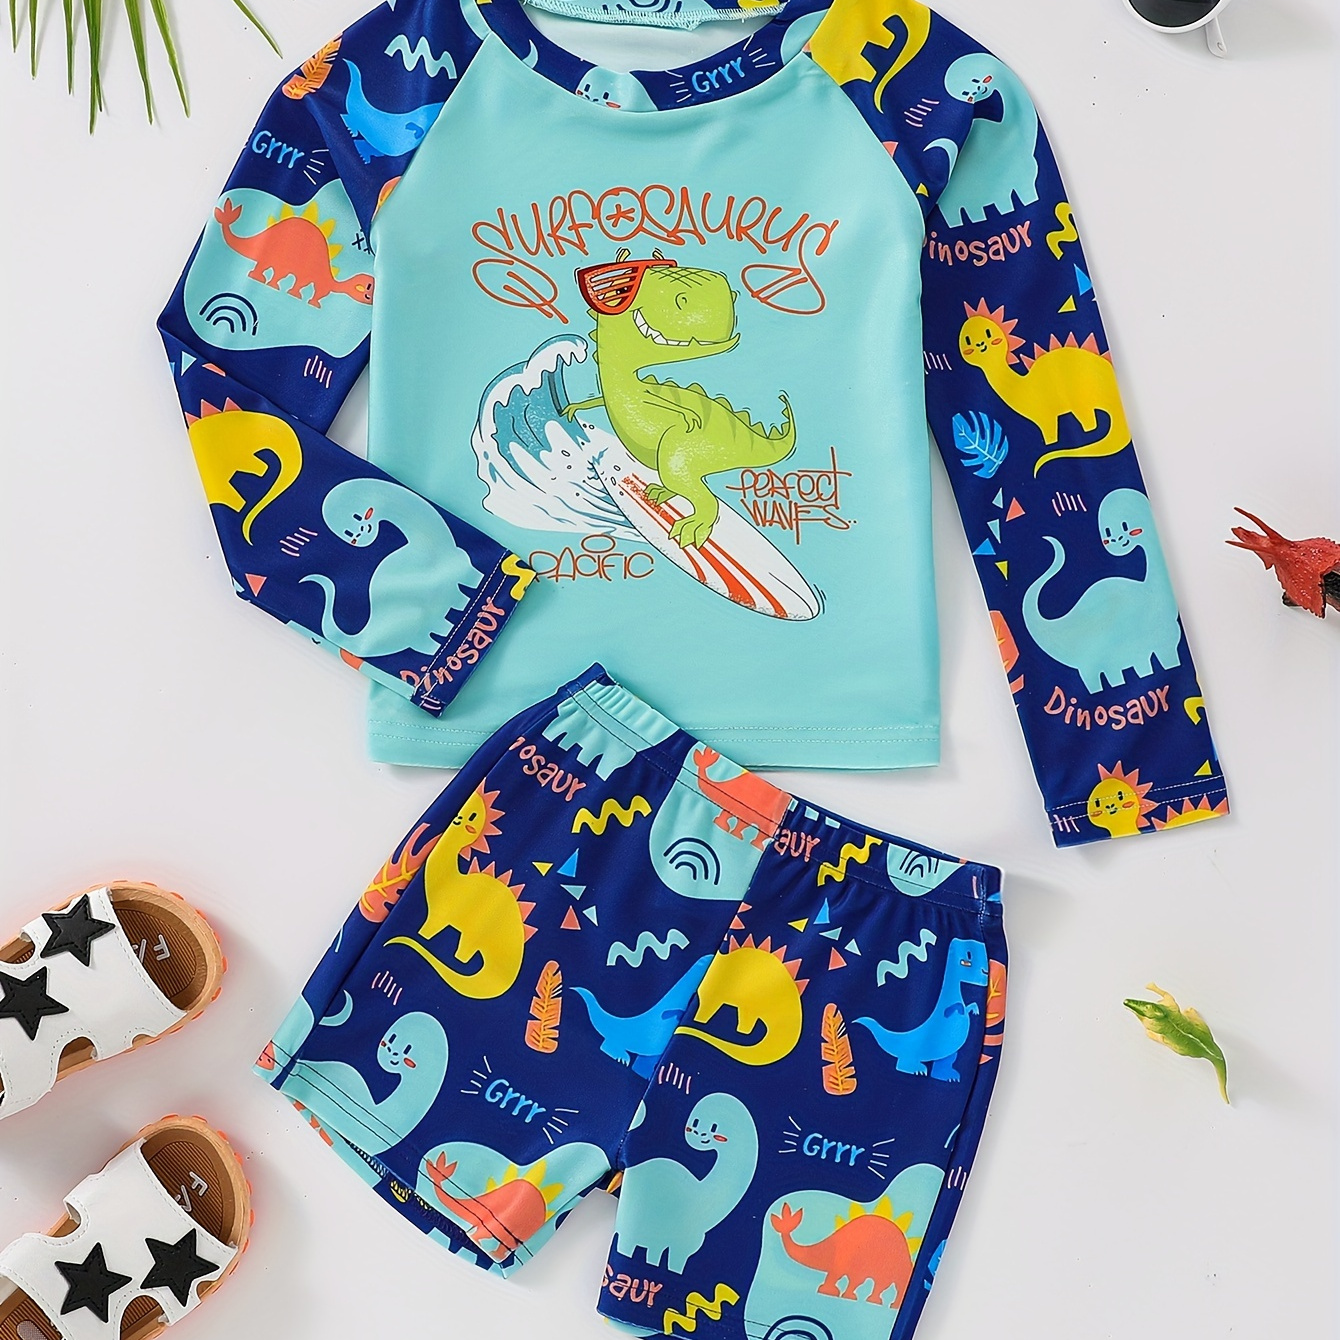 

2pcs Cute Dinosaur Surfing Pattern Swimsuit For Boys, T-shirt & Swim Trunks Set, Stretchy Surfing Suit, Boys Swimwear For Summer Beach Vacation